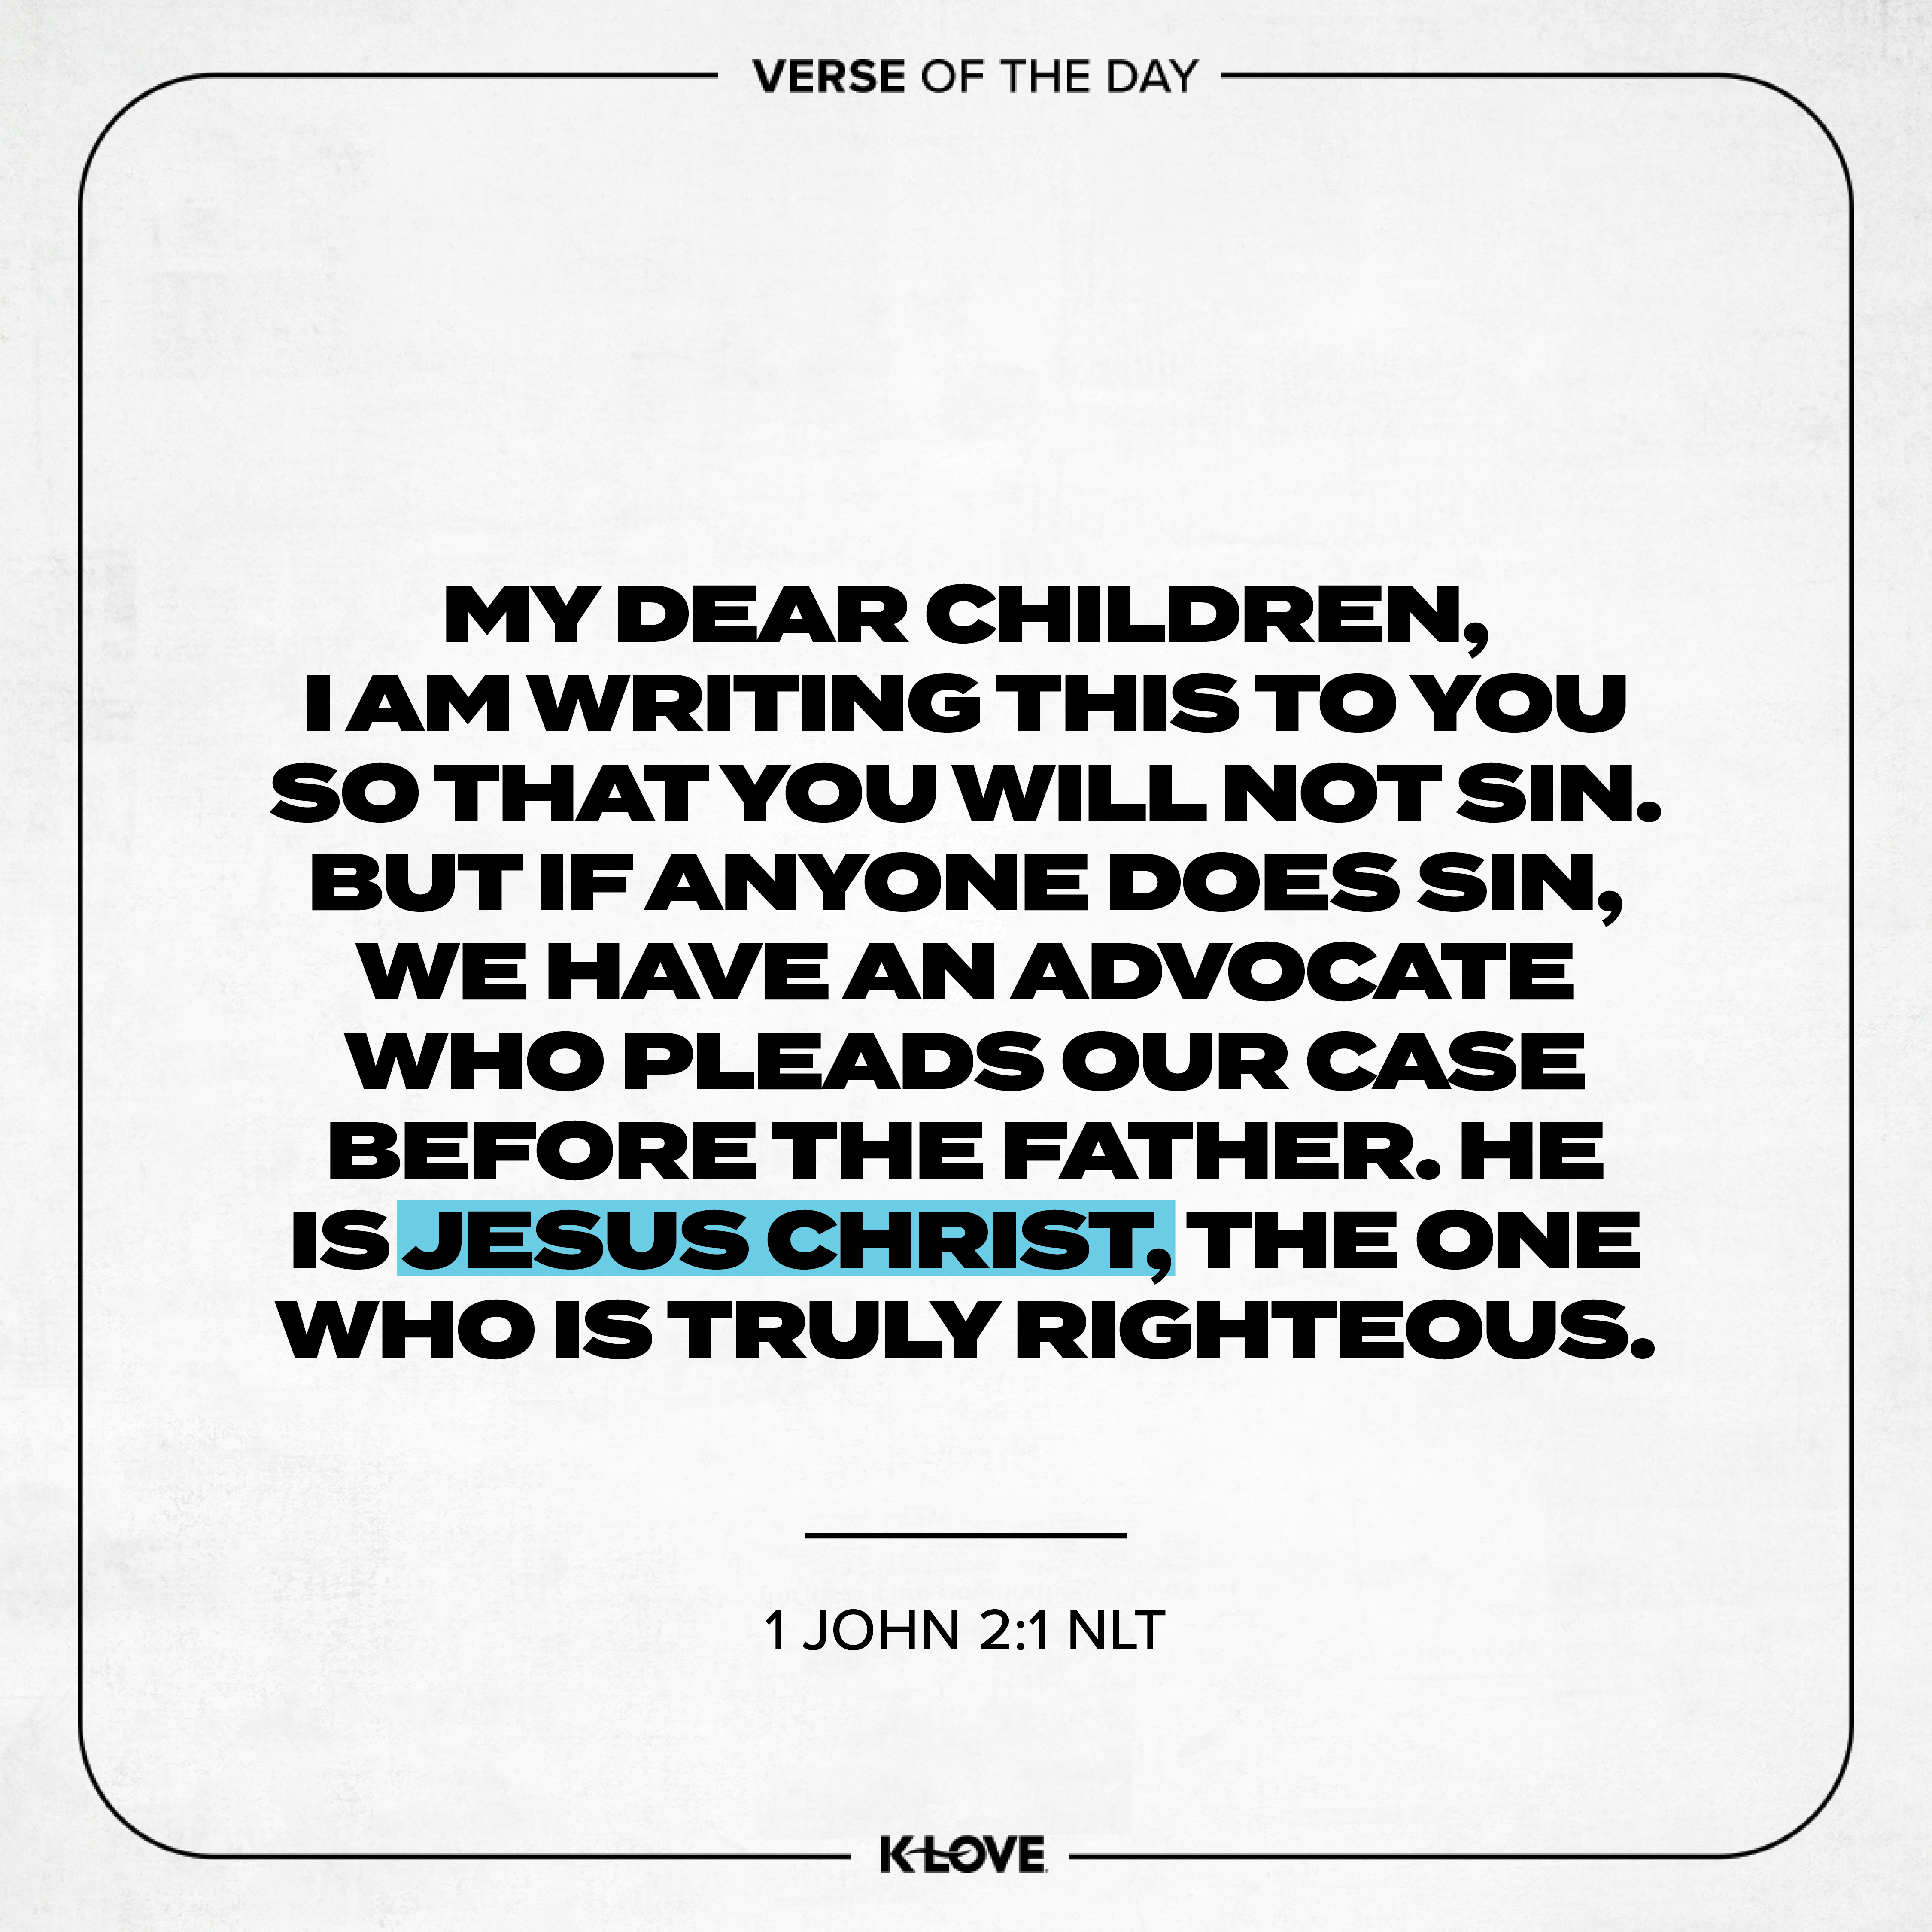 My dear children, I am writing this to you so that you will not sin. But if anyone does sin, we have an Advocate who pleads our case before the Father. He is Jesus Christ, the One who is truly righteous.